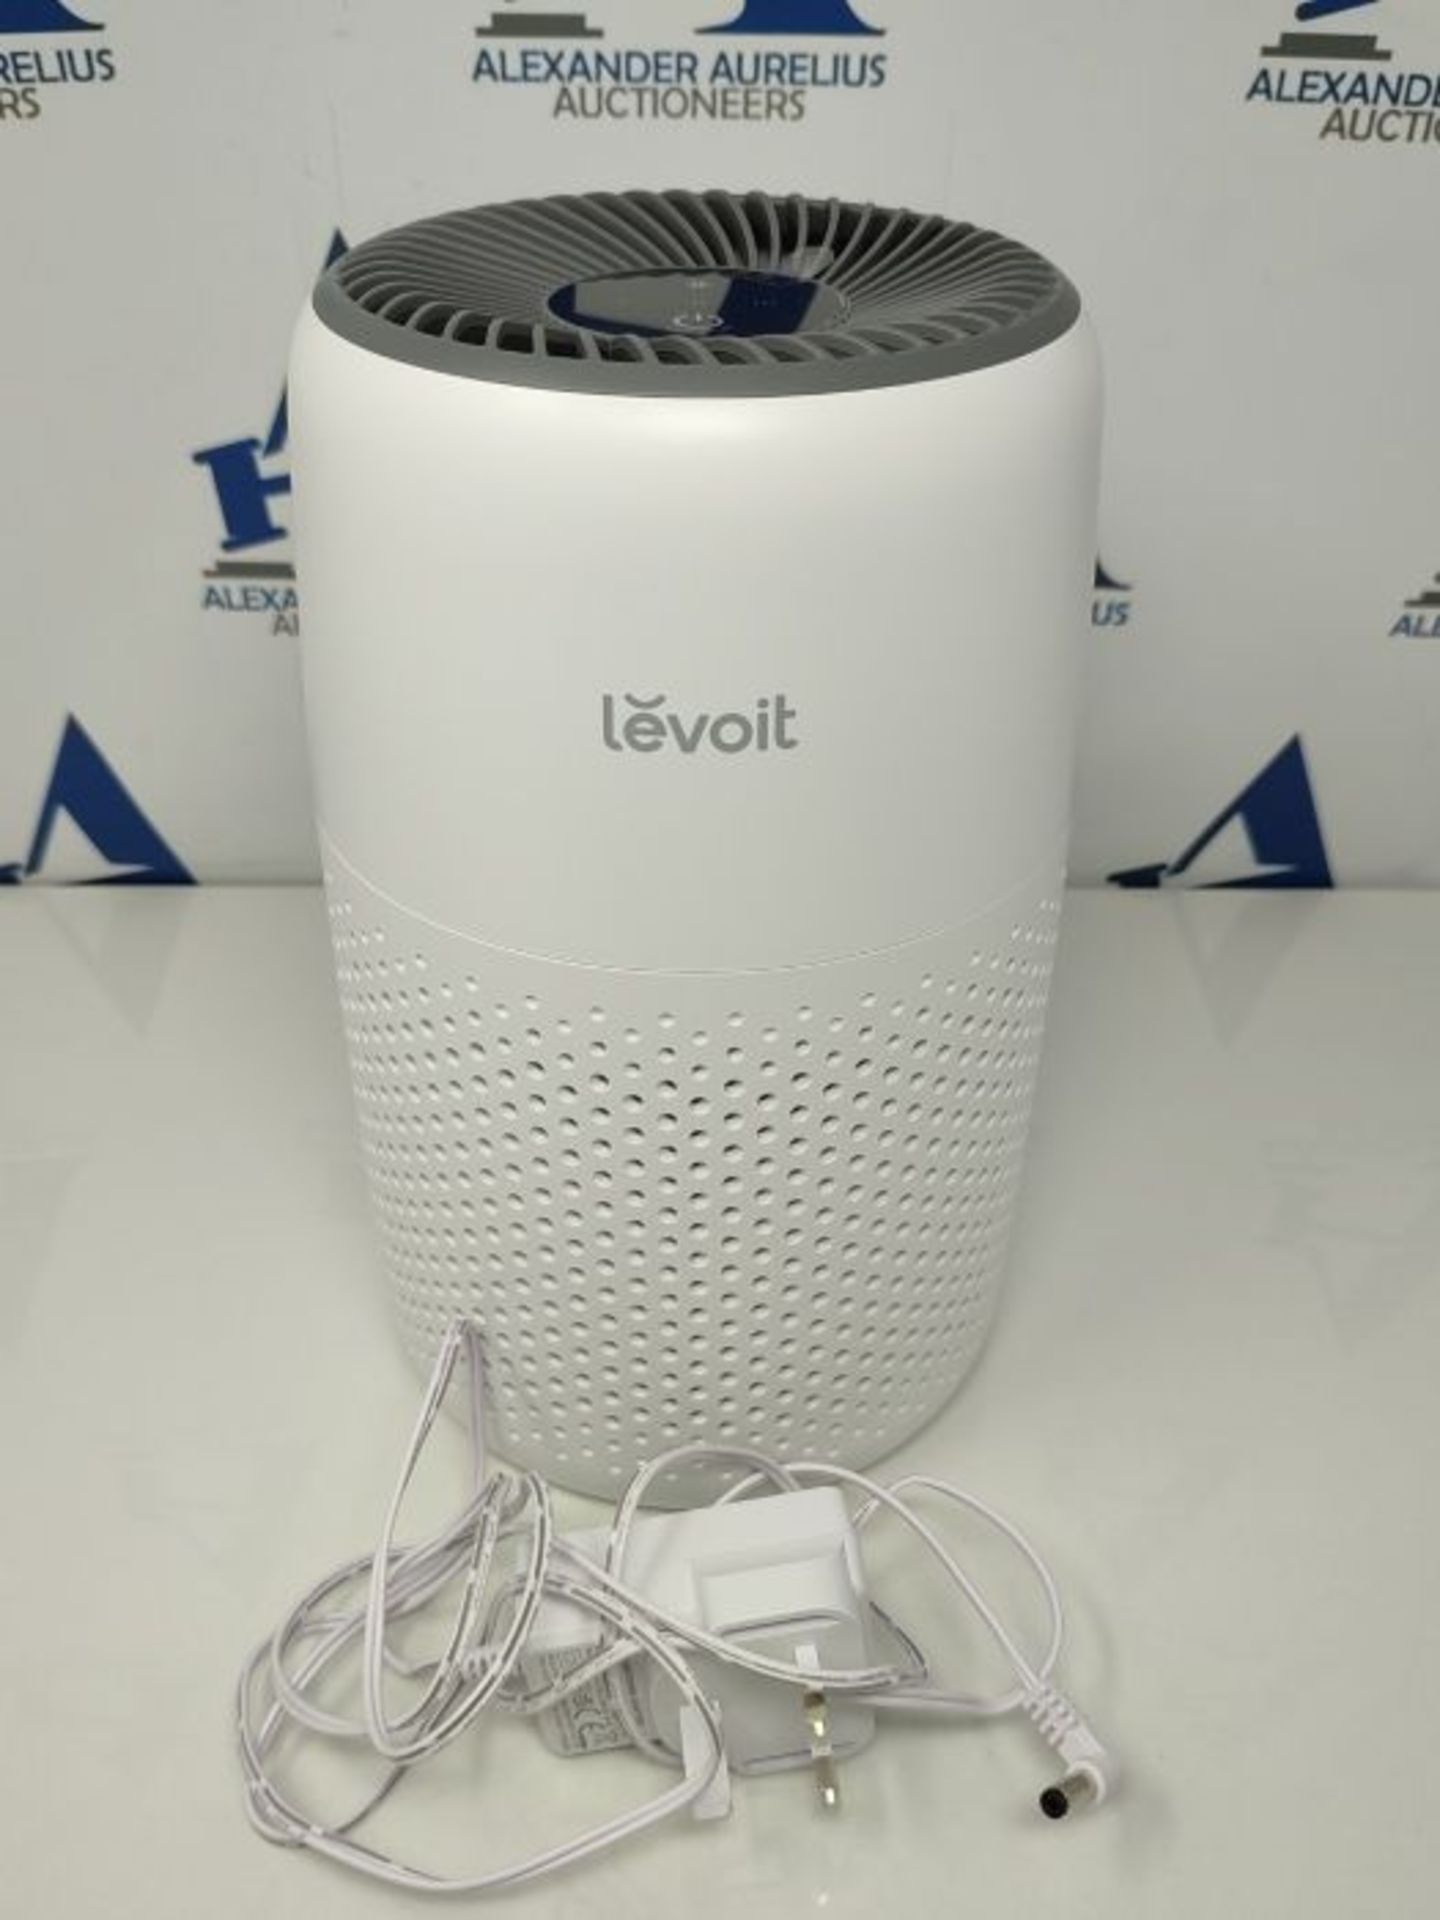 LEVOIT Air Purifier for Home Bedroom, Ultra Quiet HEPA Air Filter Cleaner with Fragran - Image 3 of 3